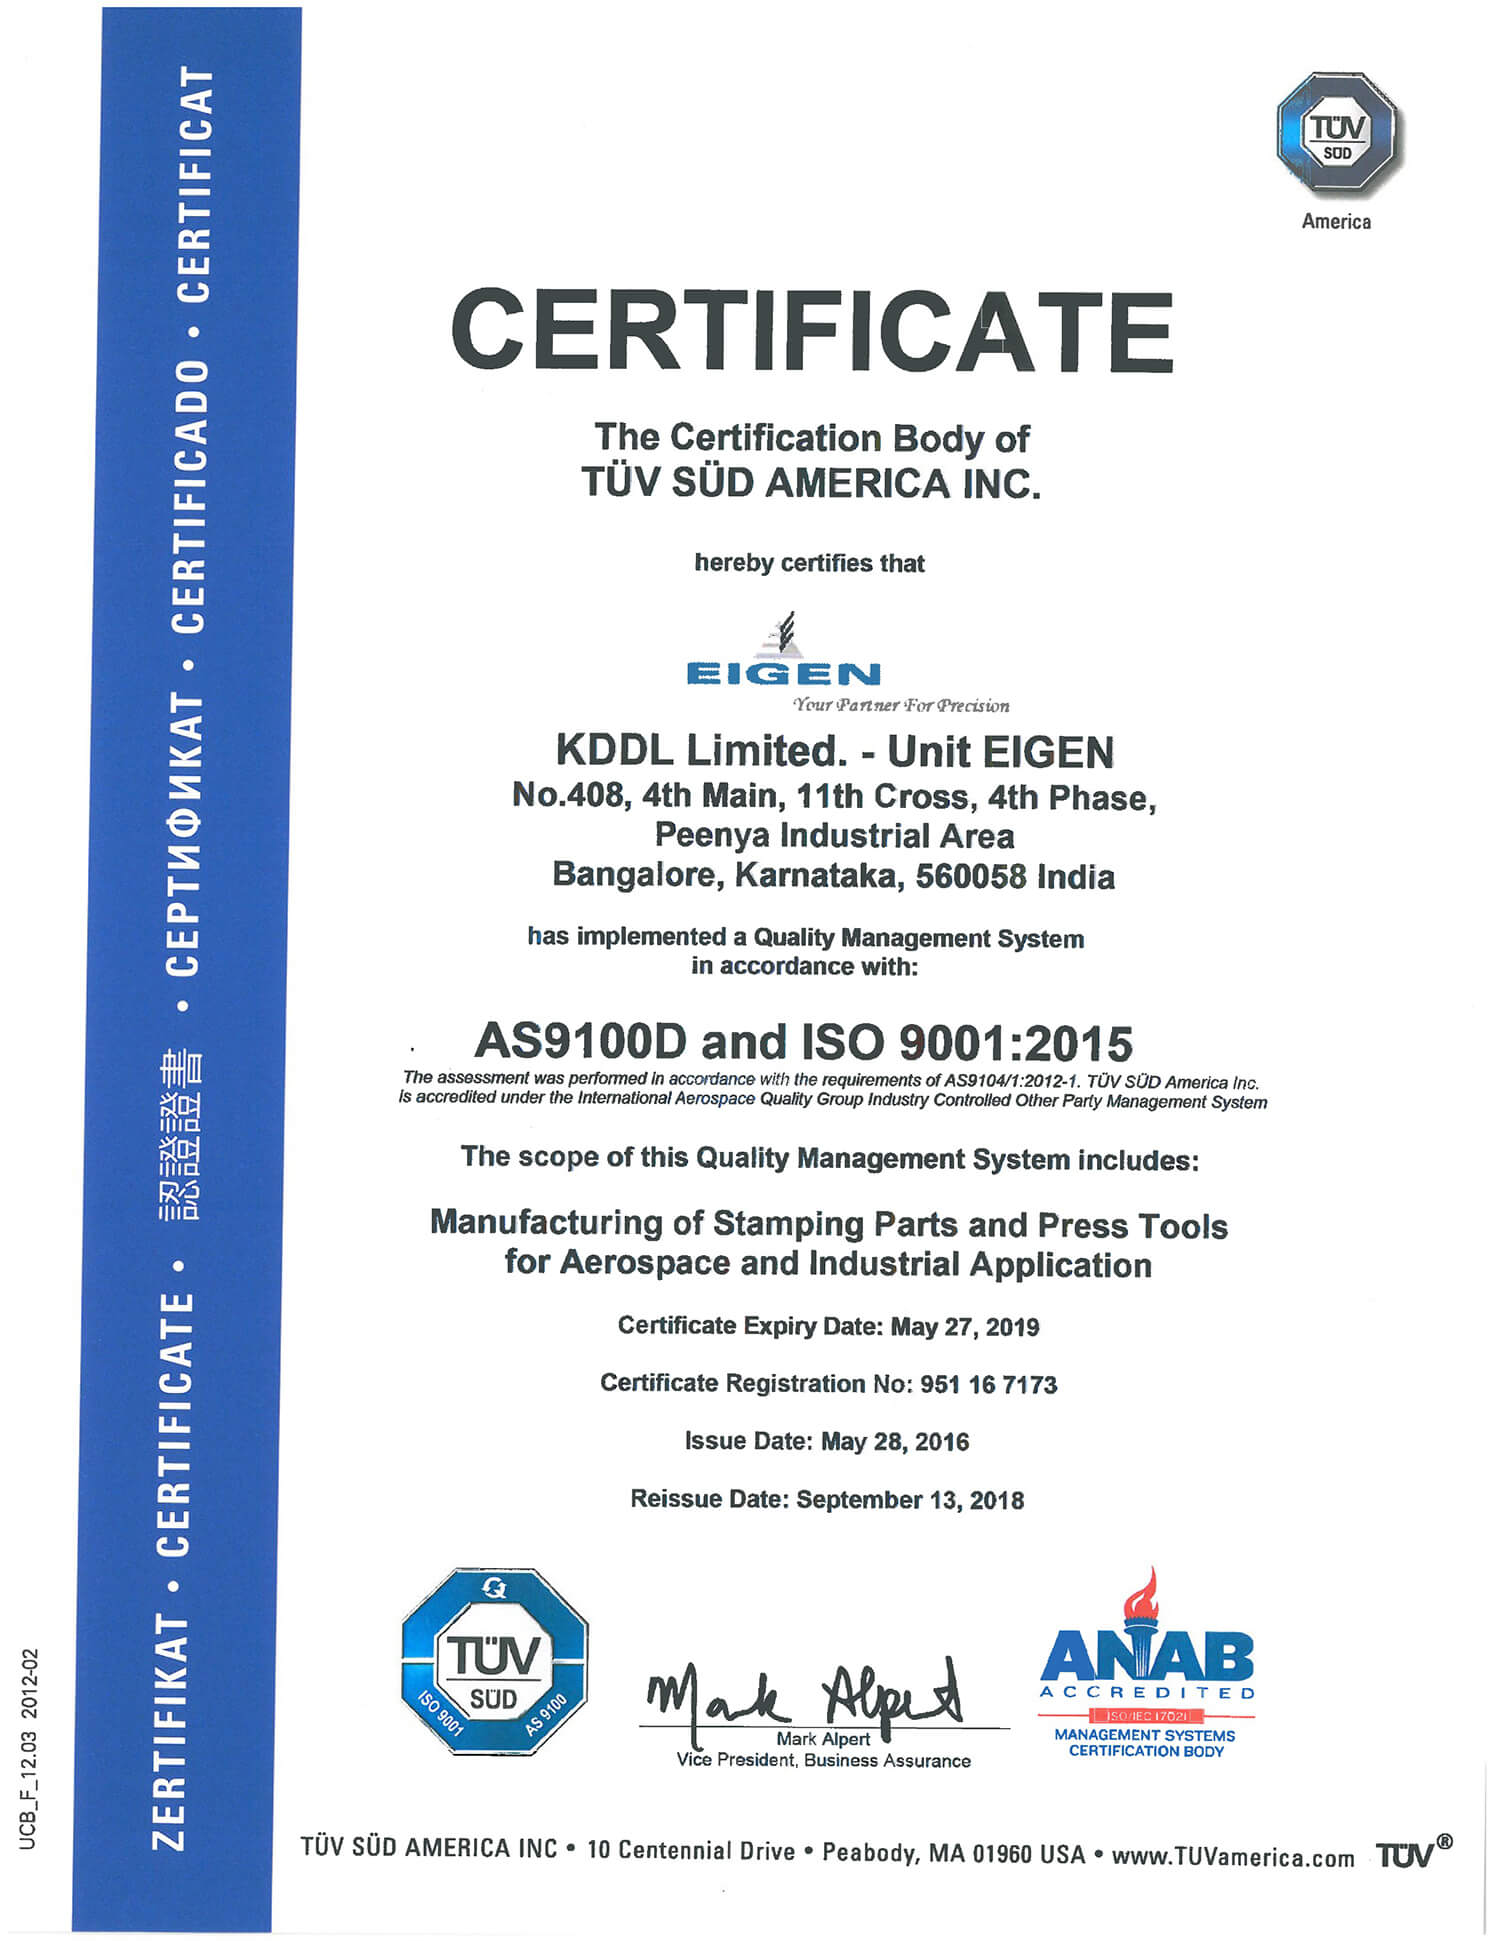 AS9100D and ISO 9001:2015